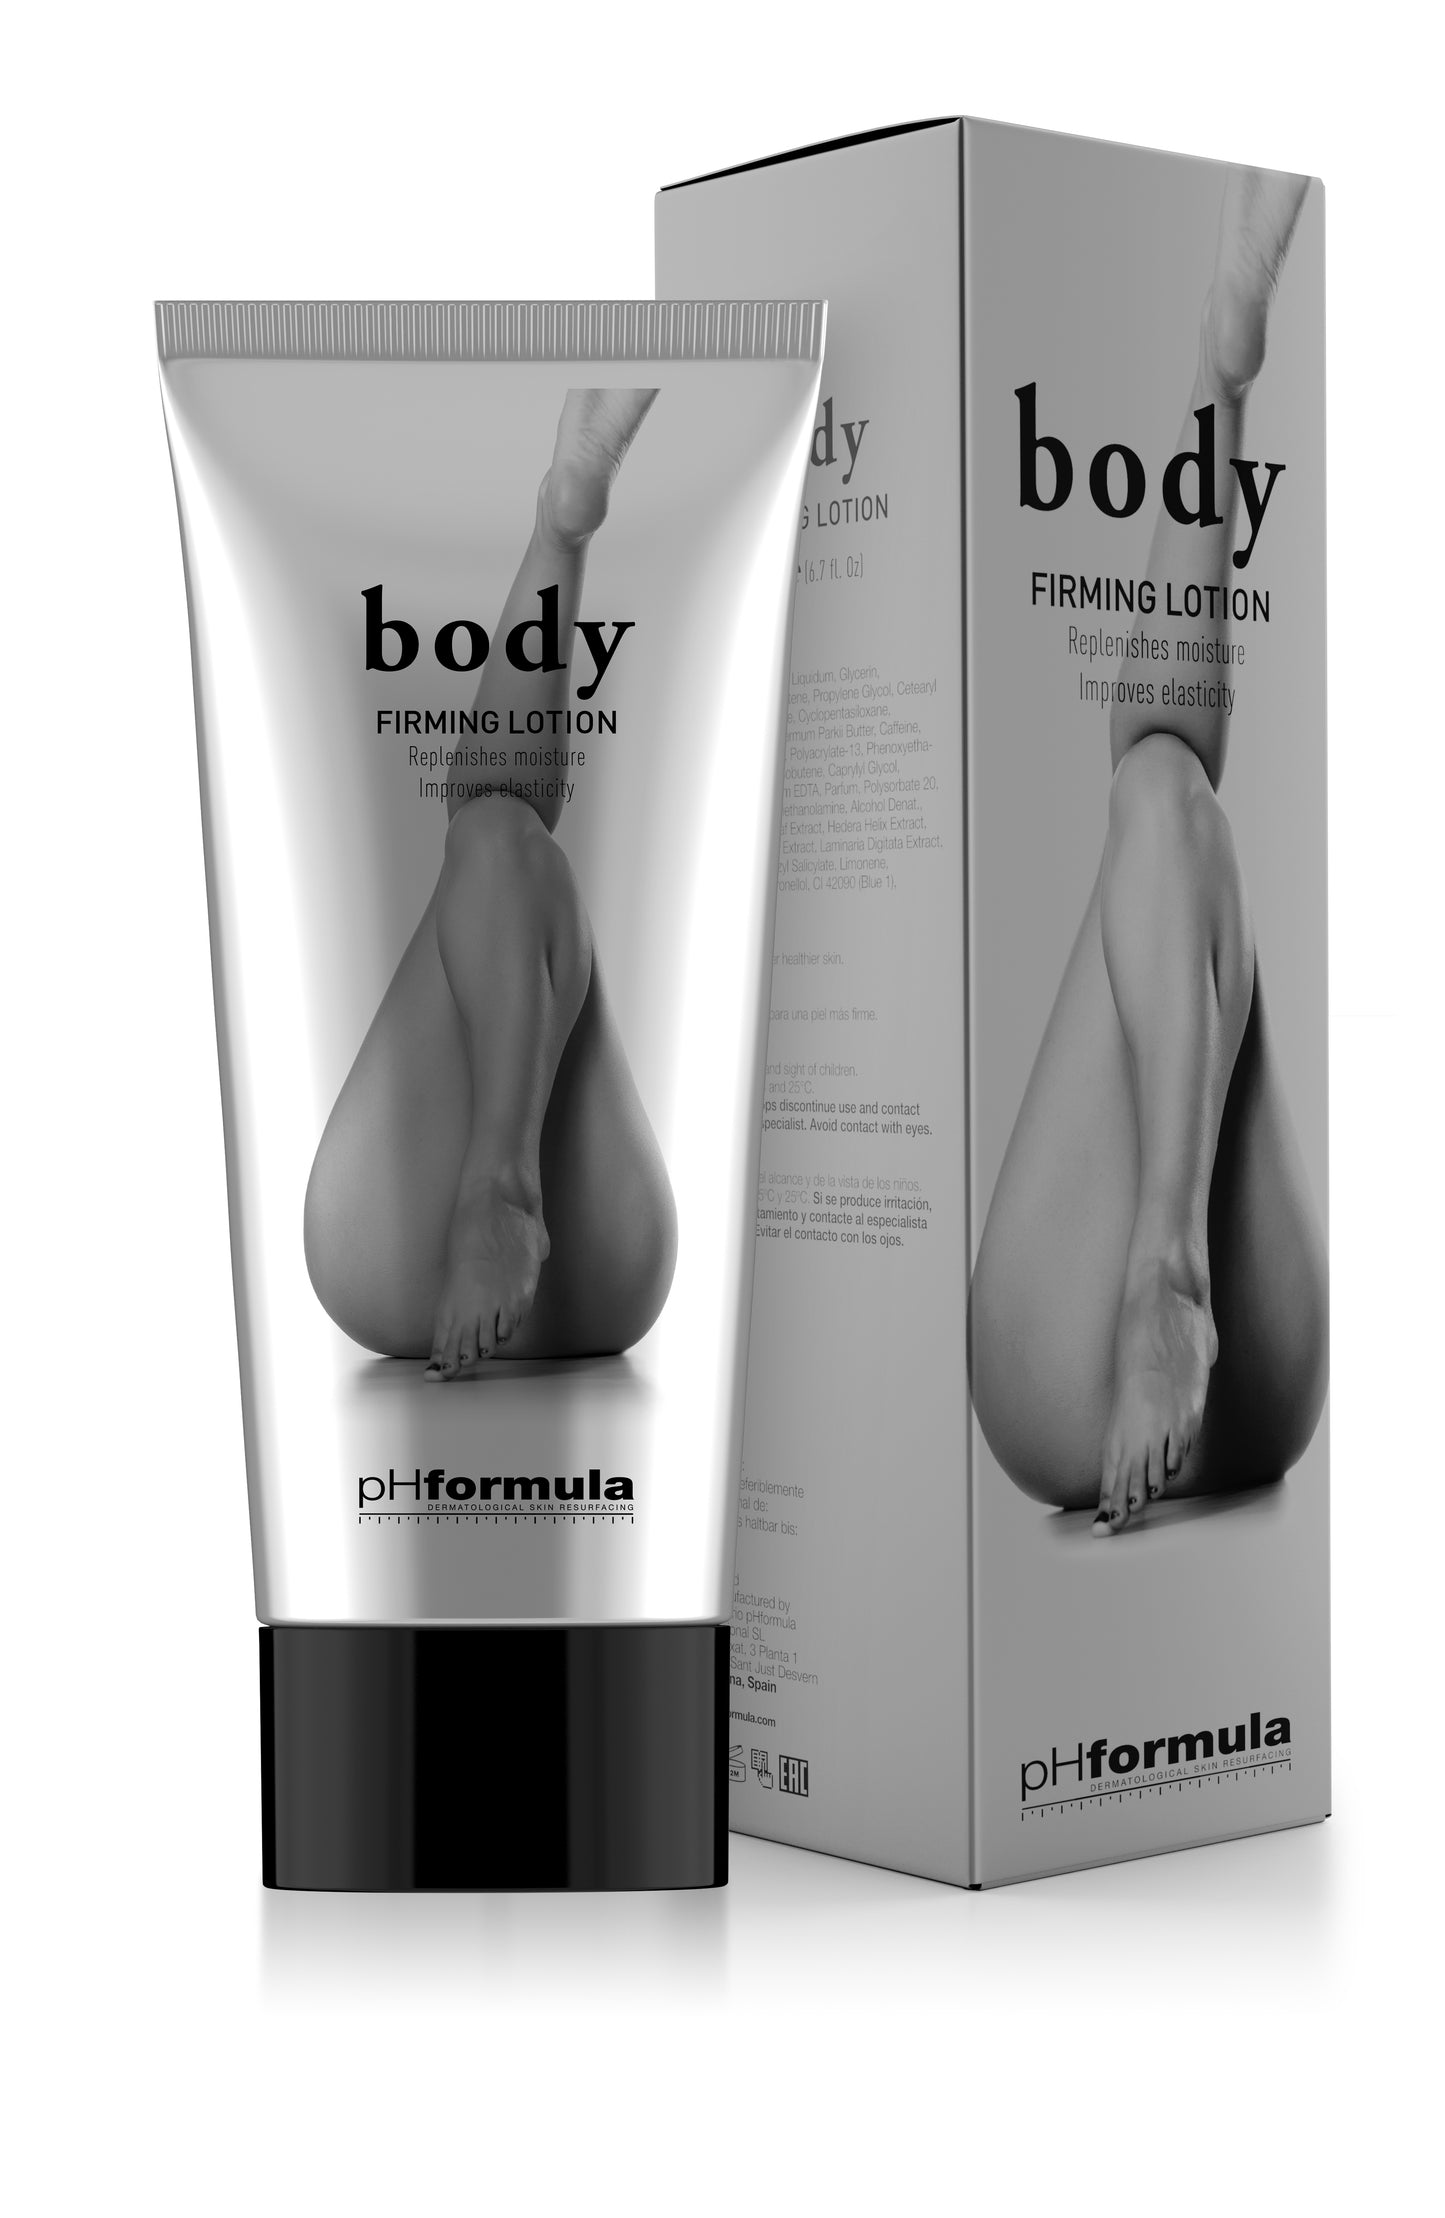 BODY Firming Lotion